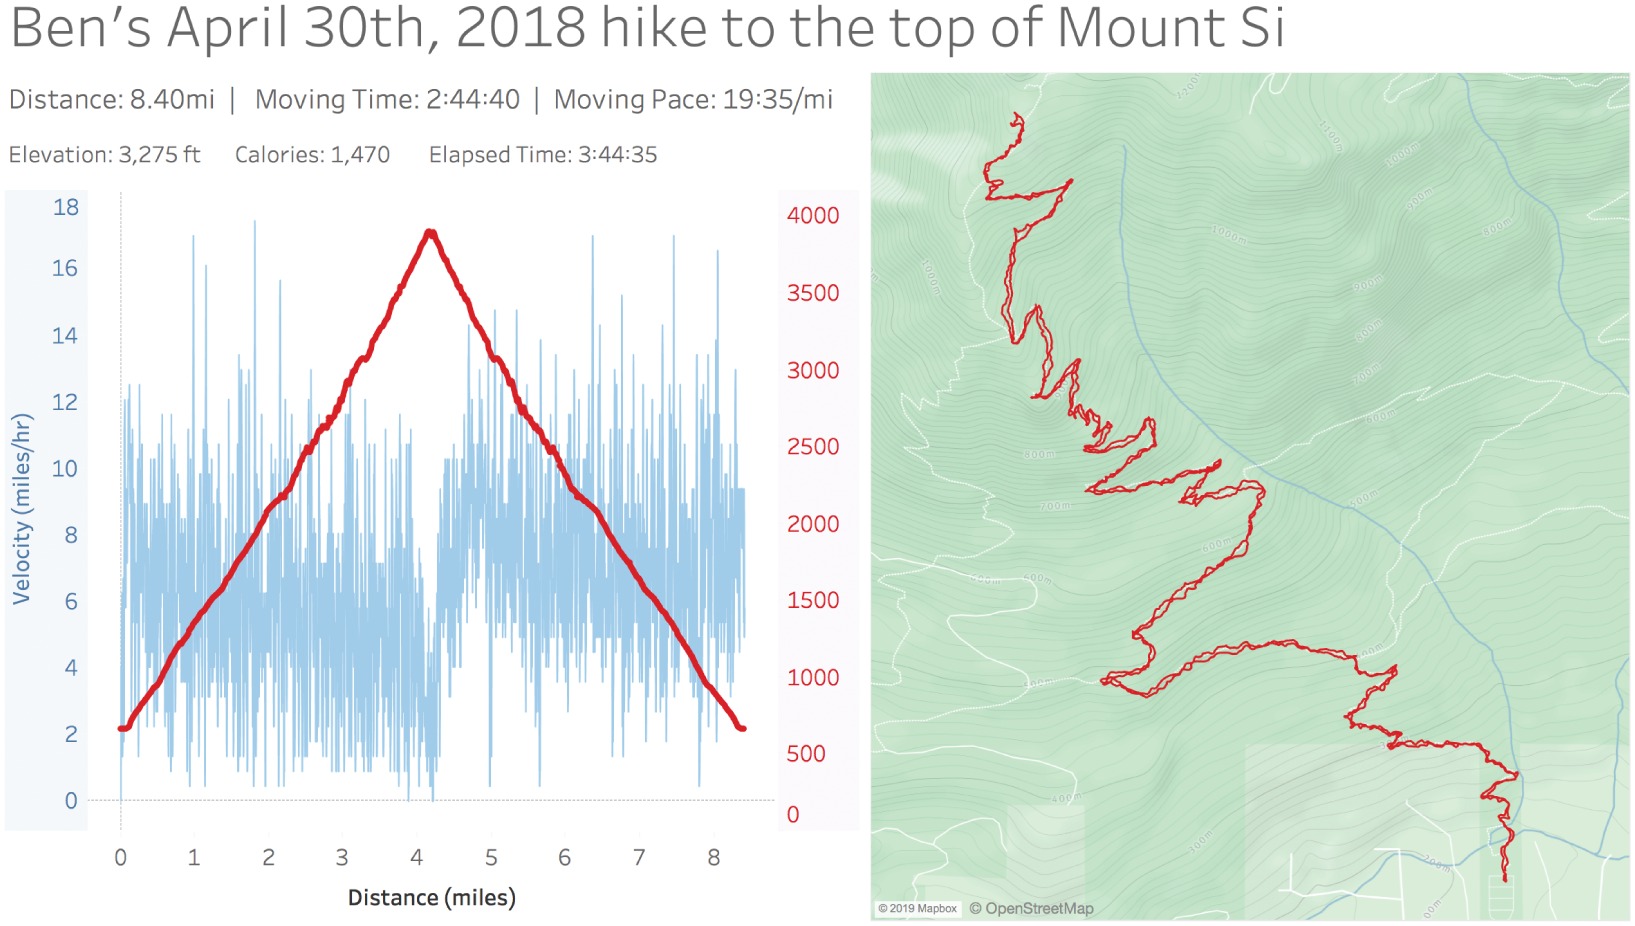 Graphs depicting a re-creation of the data visualizations of the fitness network site of a person who hiked to the top of a mountain in the year 2018.